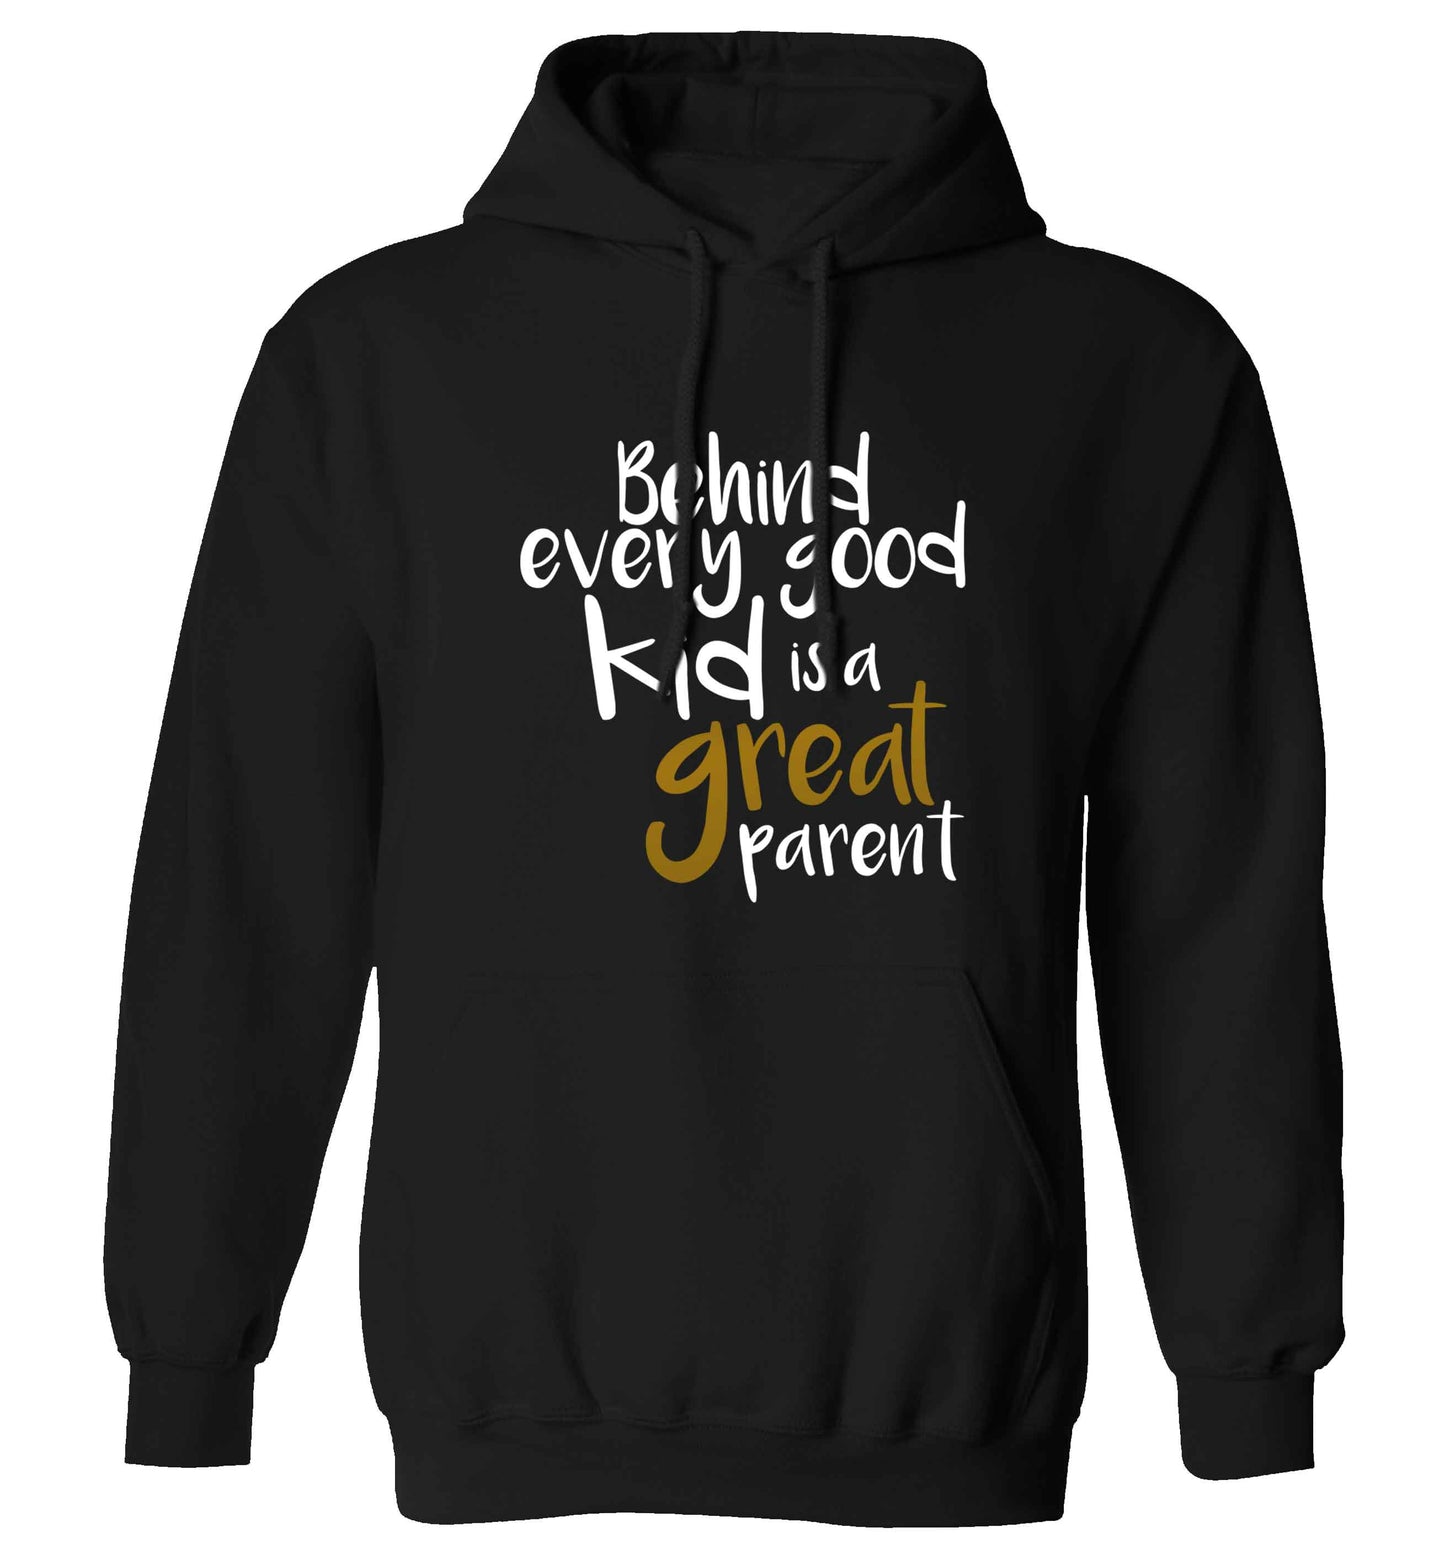 Behind every good kid is a great parent adults unisex black hoodie 2XL